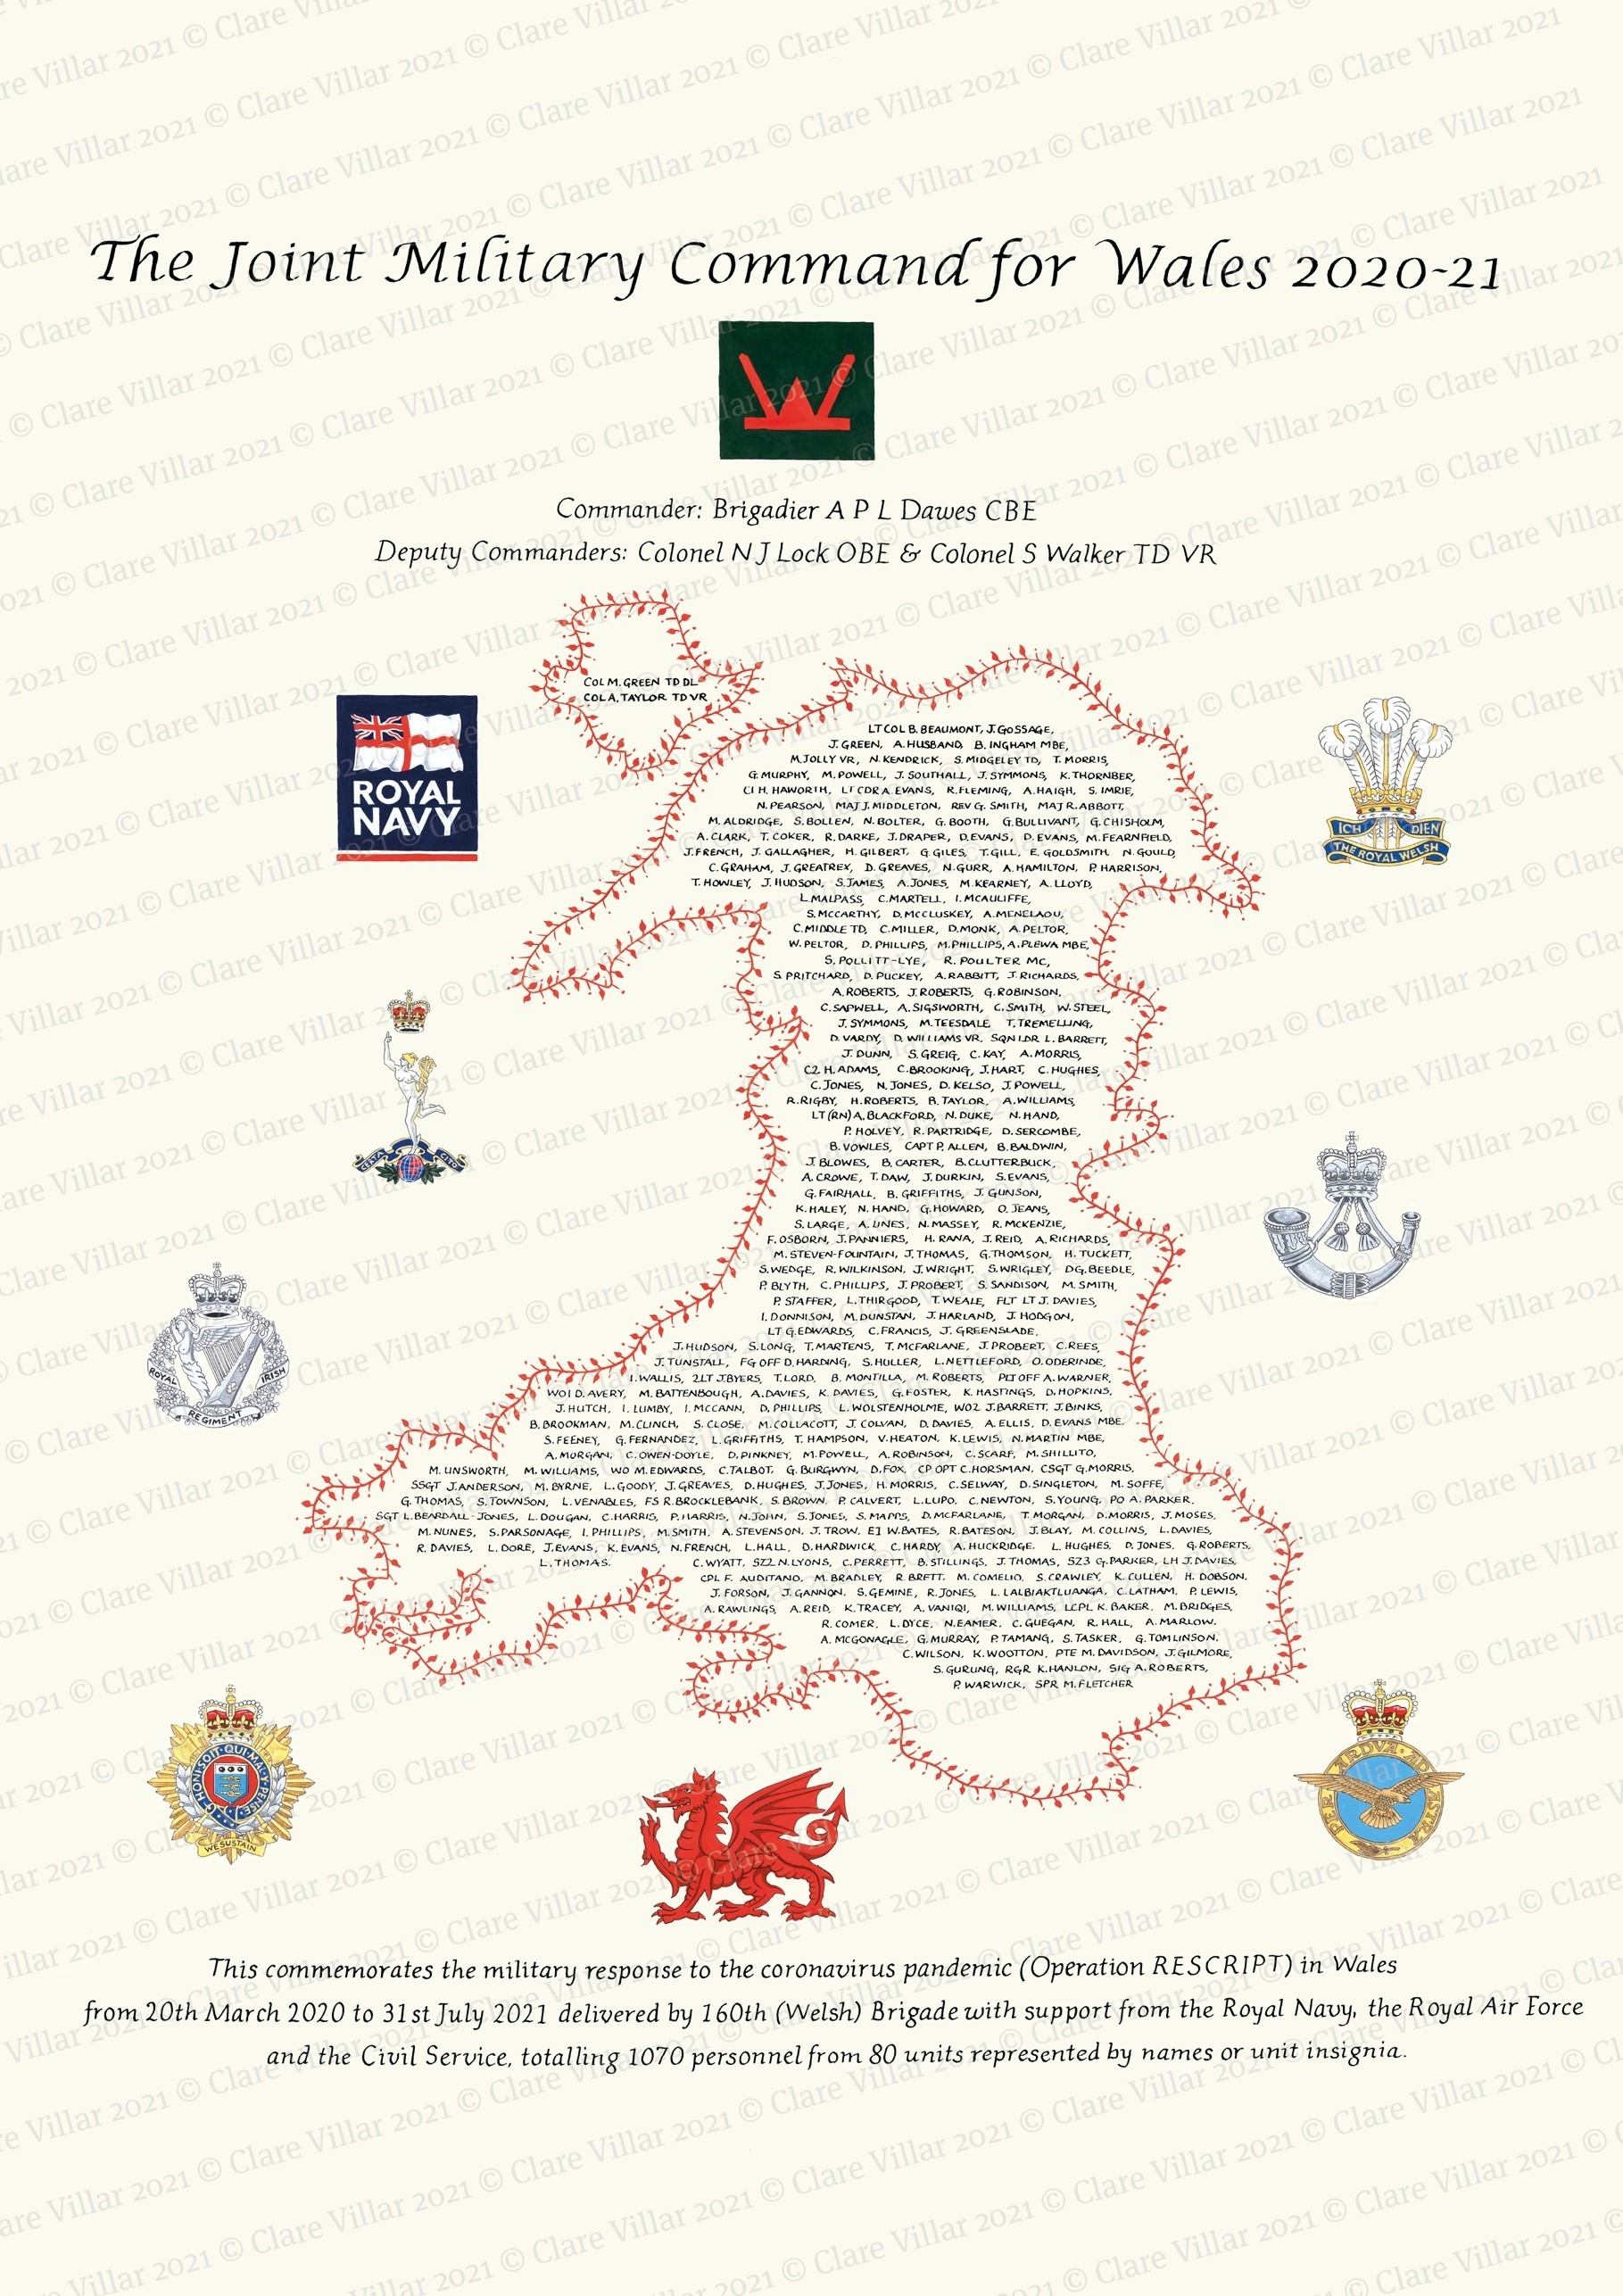 The roll of honour commemmorates military personnel who hepled the NHS in Wales during the pandemic